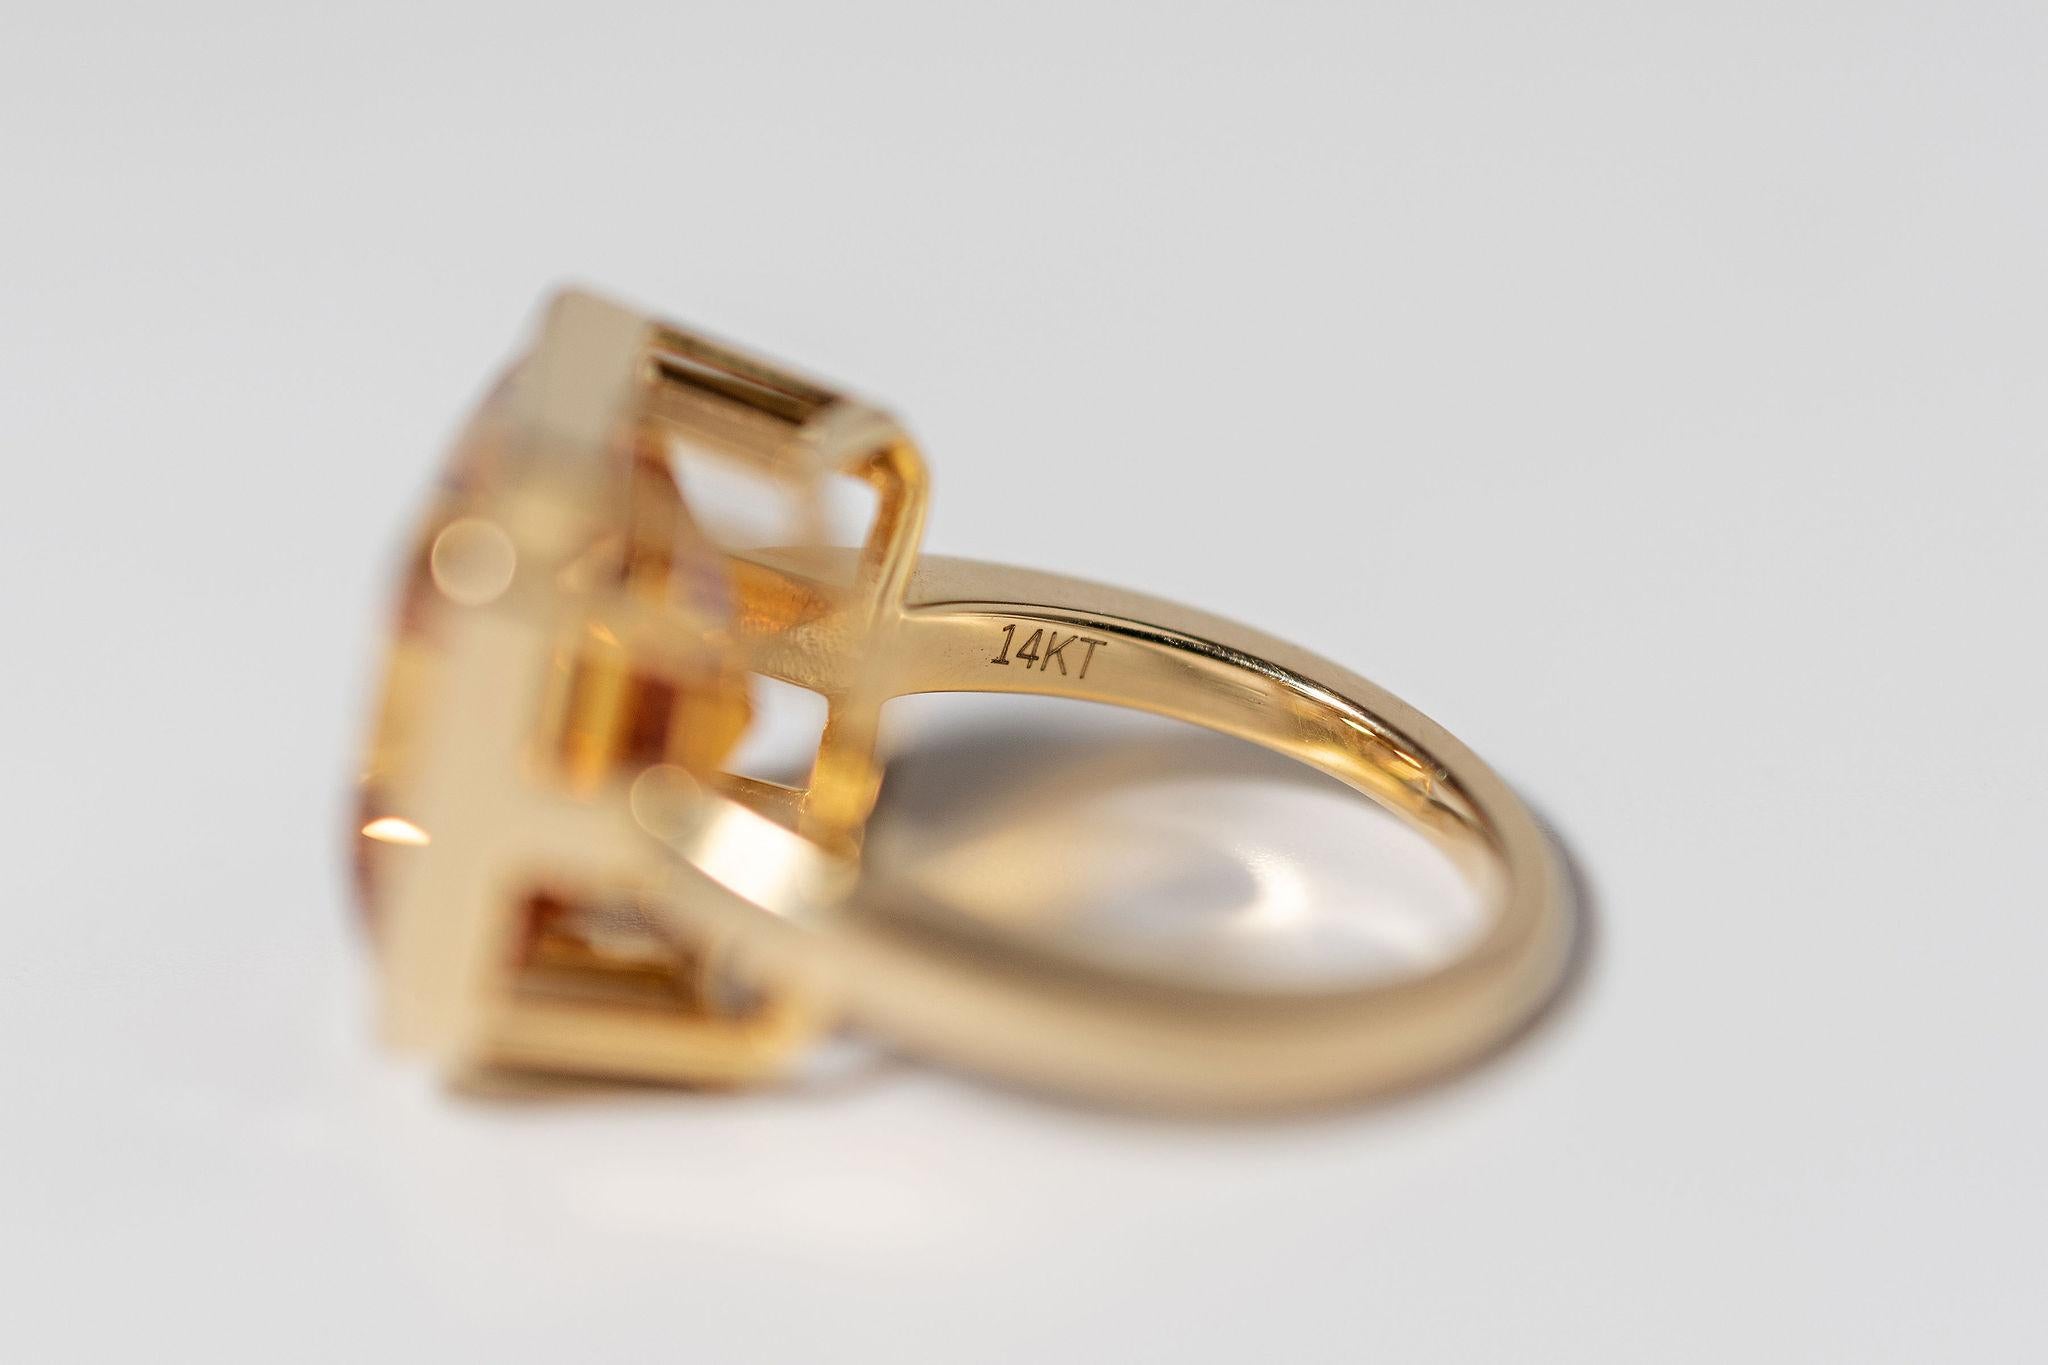 Rare 7.88ct Orange Citrine Pinky Ring, Bezel Set & Handmade in 14k Yellow Gold In New Condition For Sale In London, CA